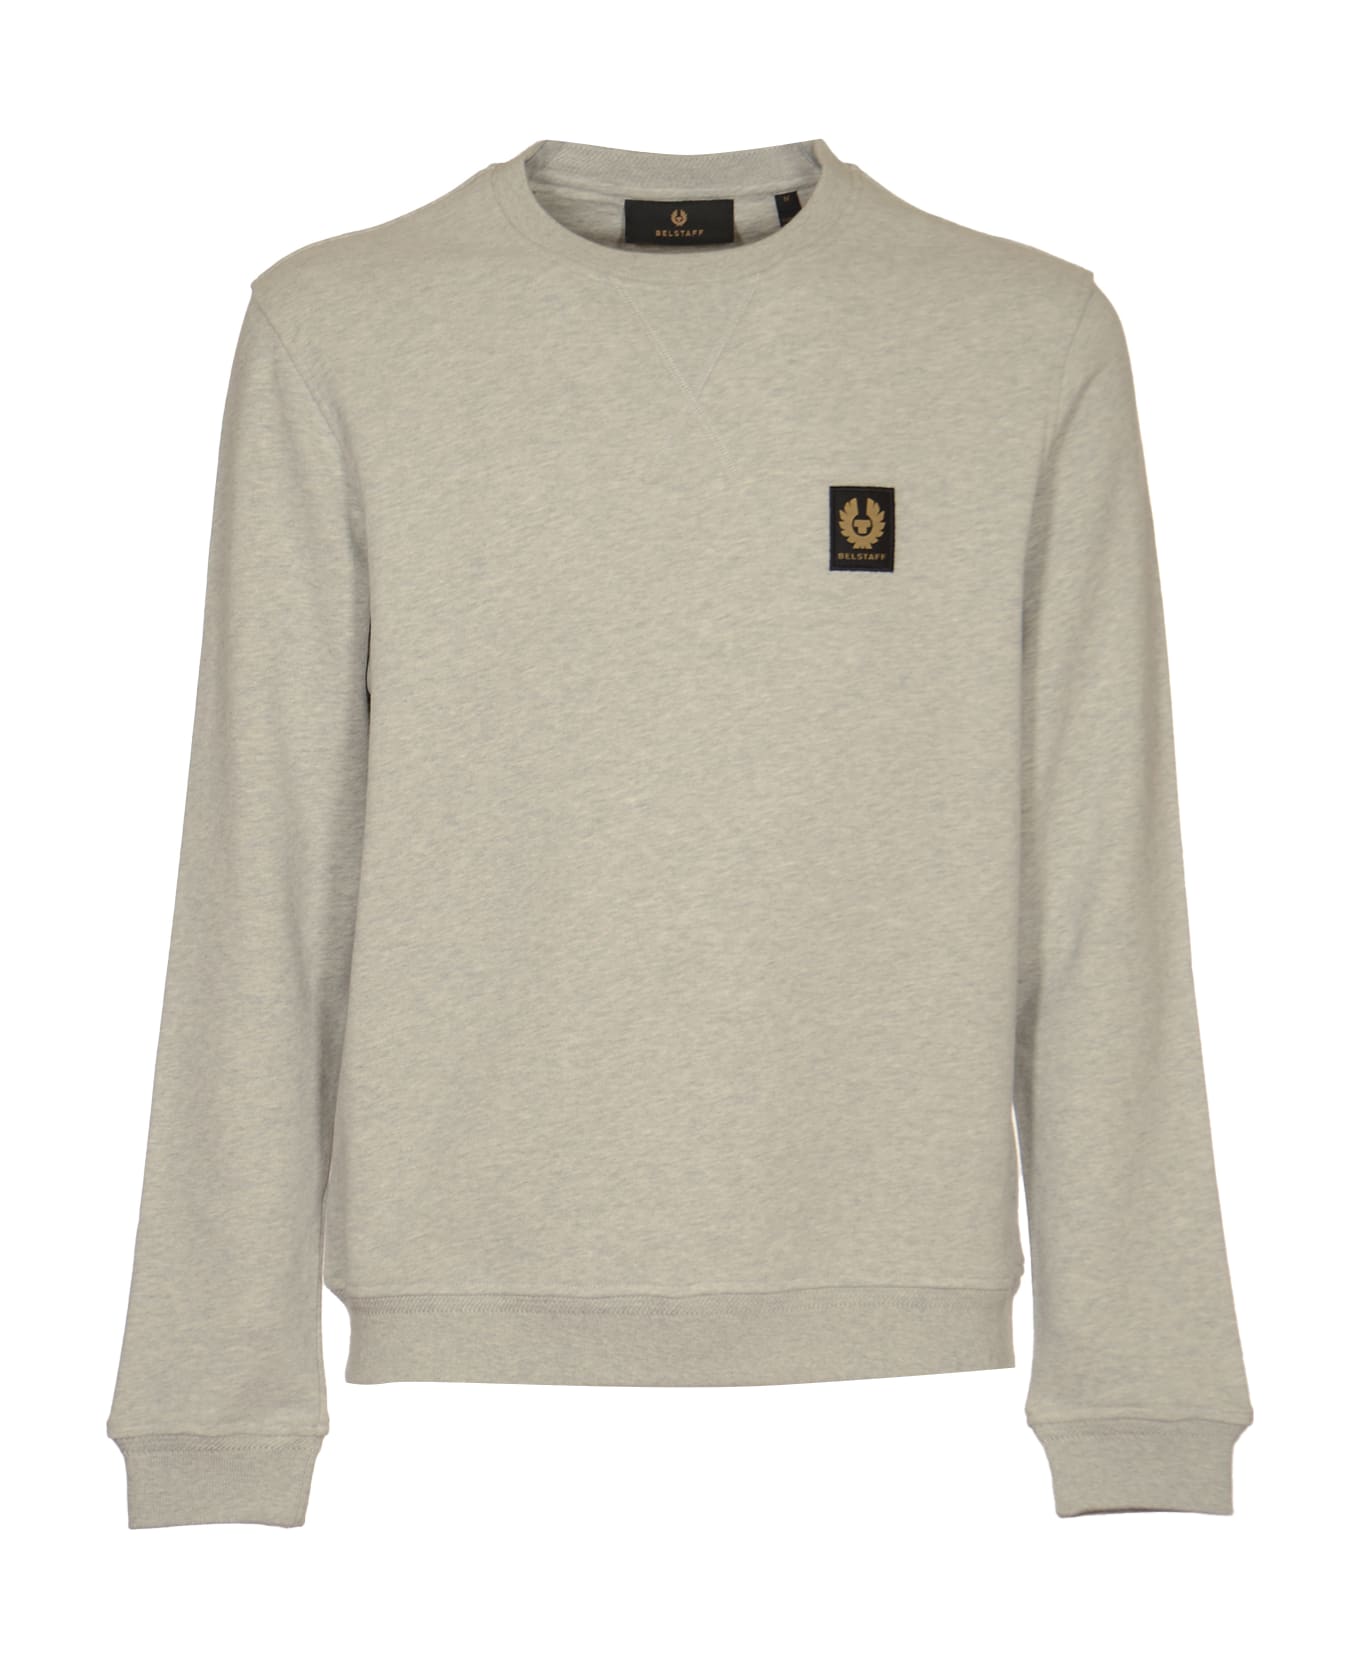 Belstaff Logo Patched Ribbed Sweatshirt - Old Silver Heather